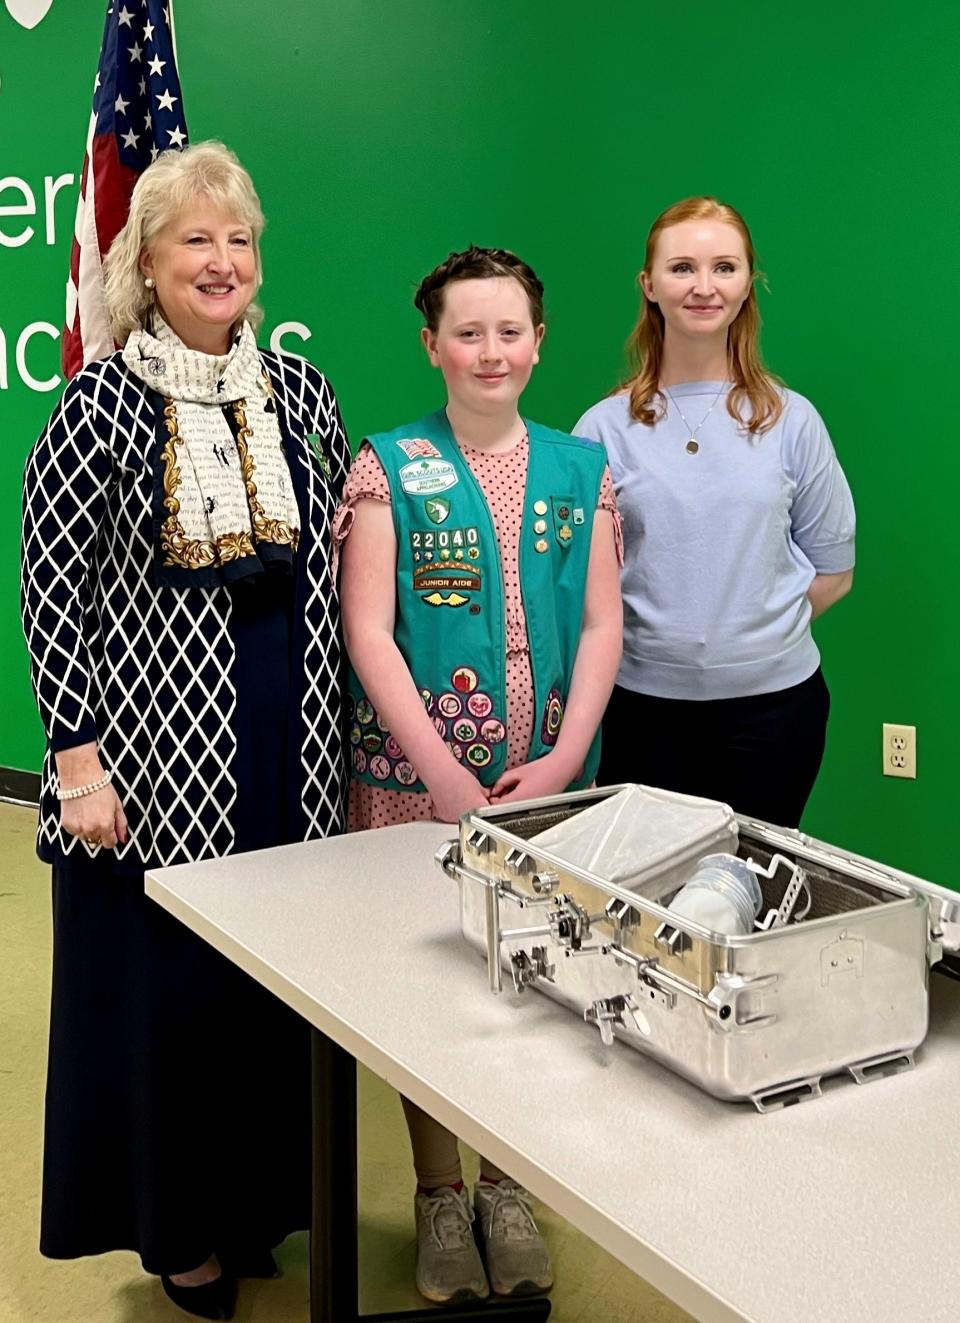 Eve Whittenburg, Y-12 historian, surprises Gracie Ogle at her award ceremony March 16 with an authentic moon box used by NASA. With them is Girl Scouts of Southern Appalachians CEO Lynn Fugate, left.